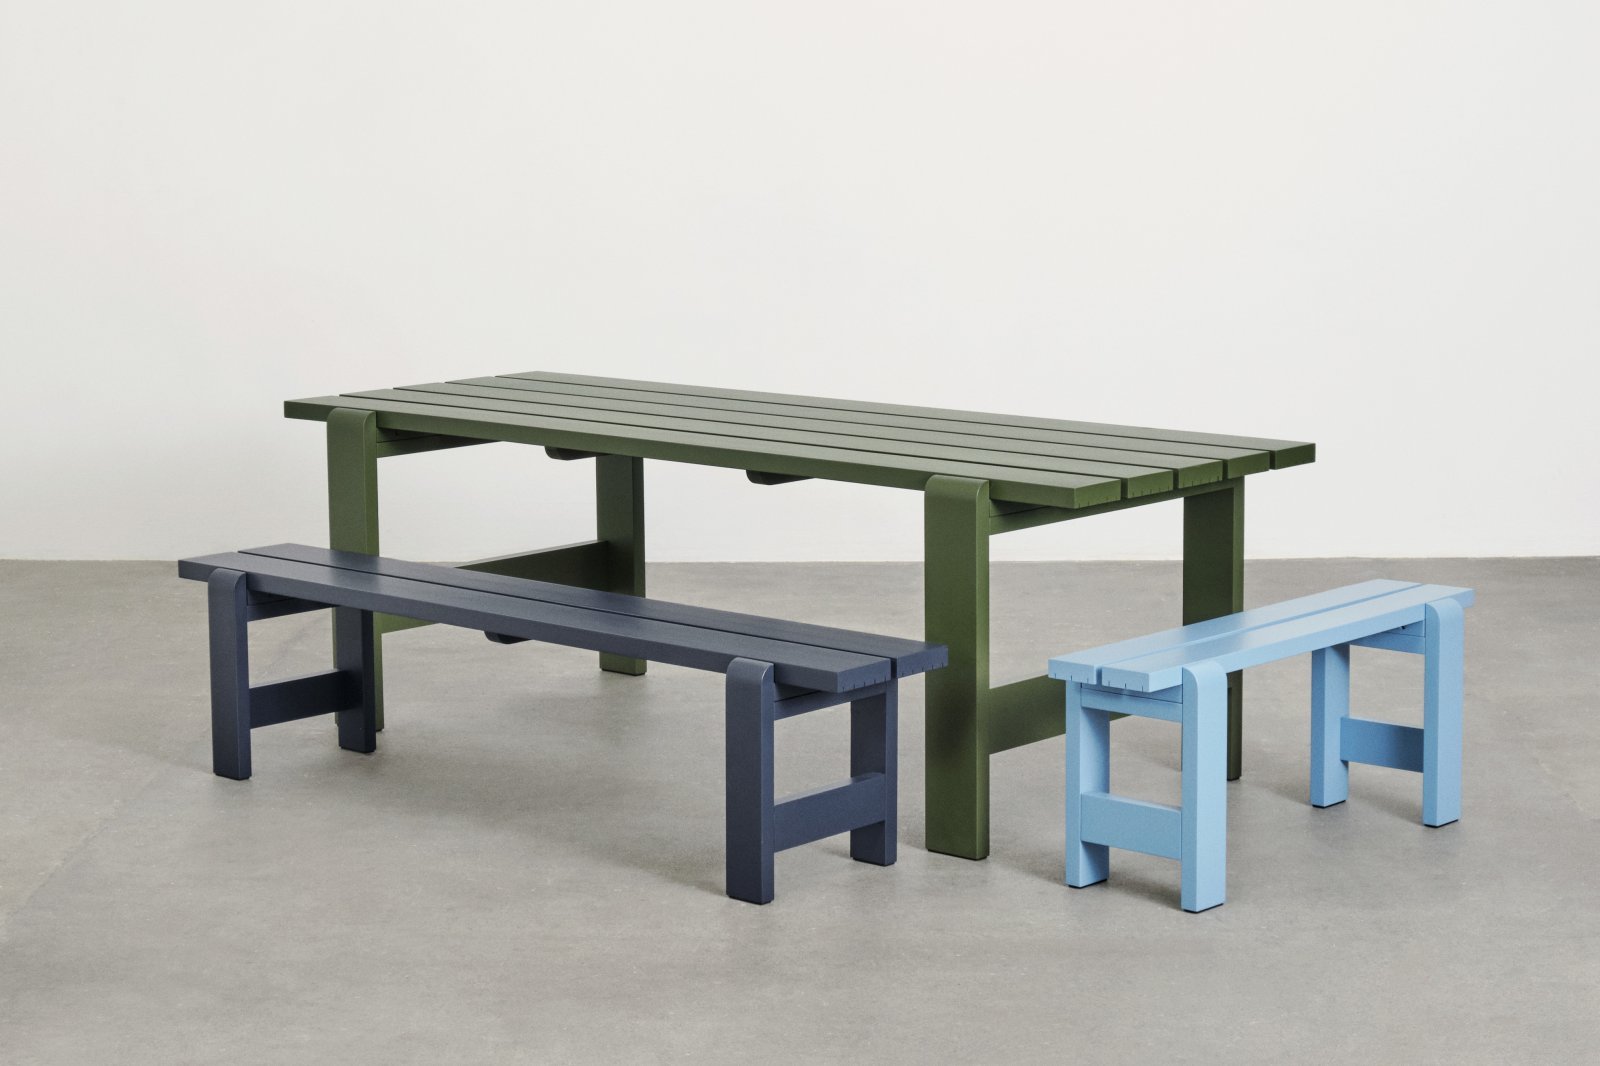 Weekday Table olive wb lacquer pinewood_Weekday Bench steel blue_azure blue wb lacquer pinewood.jpg